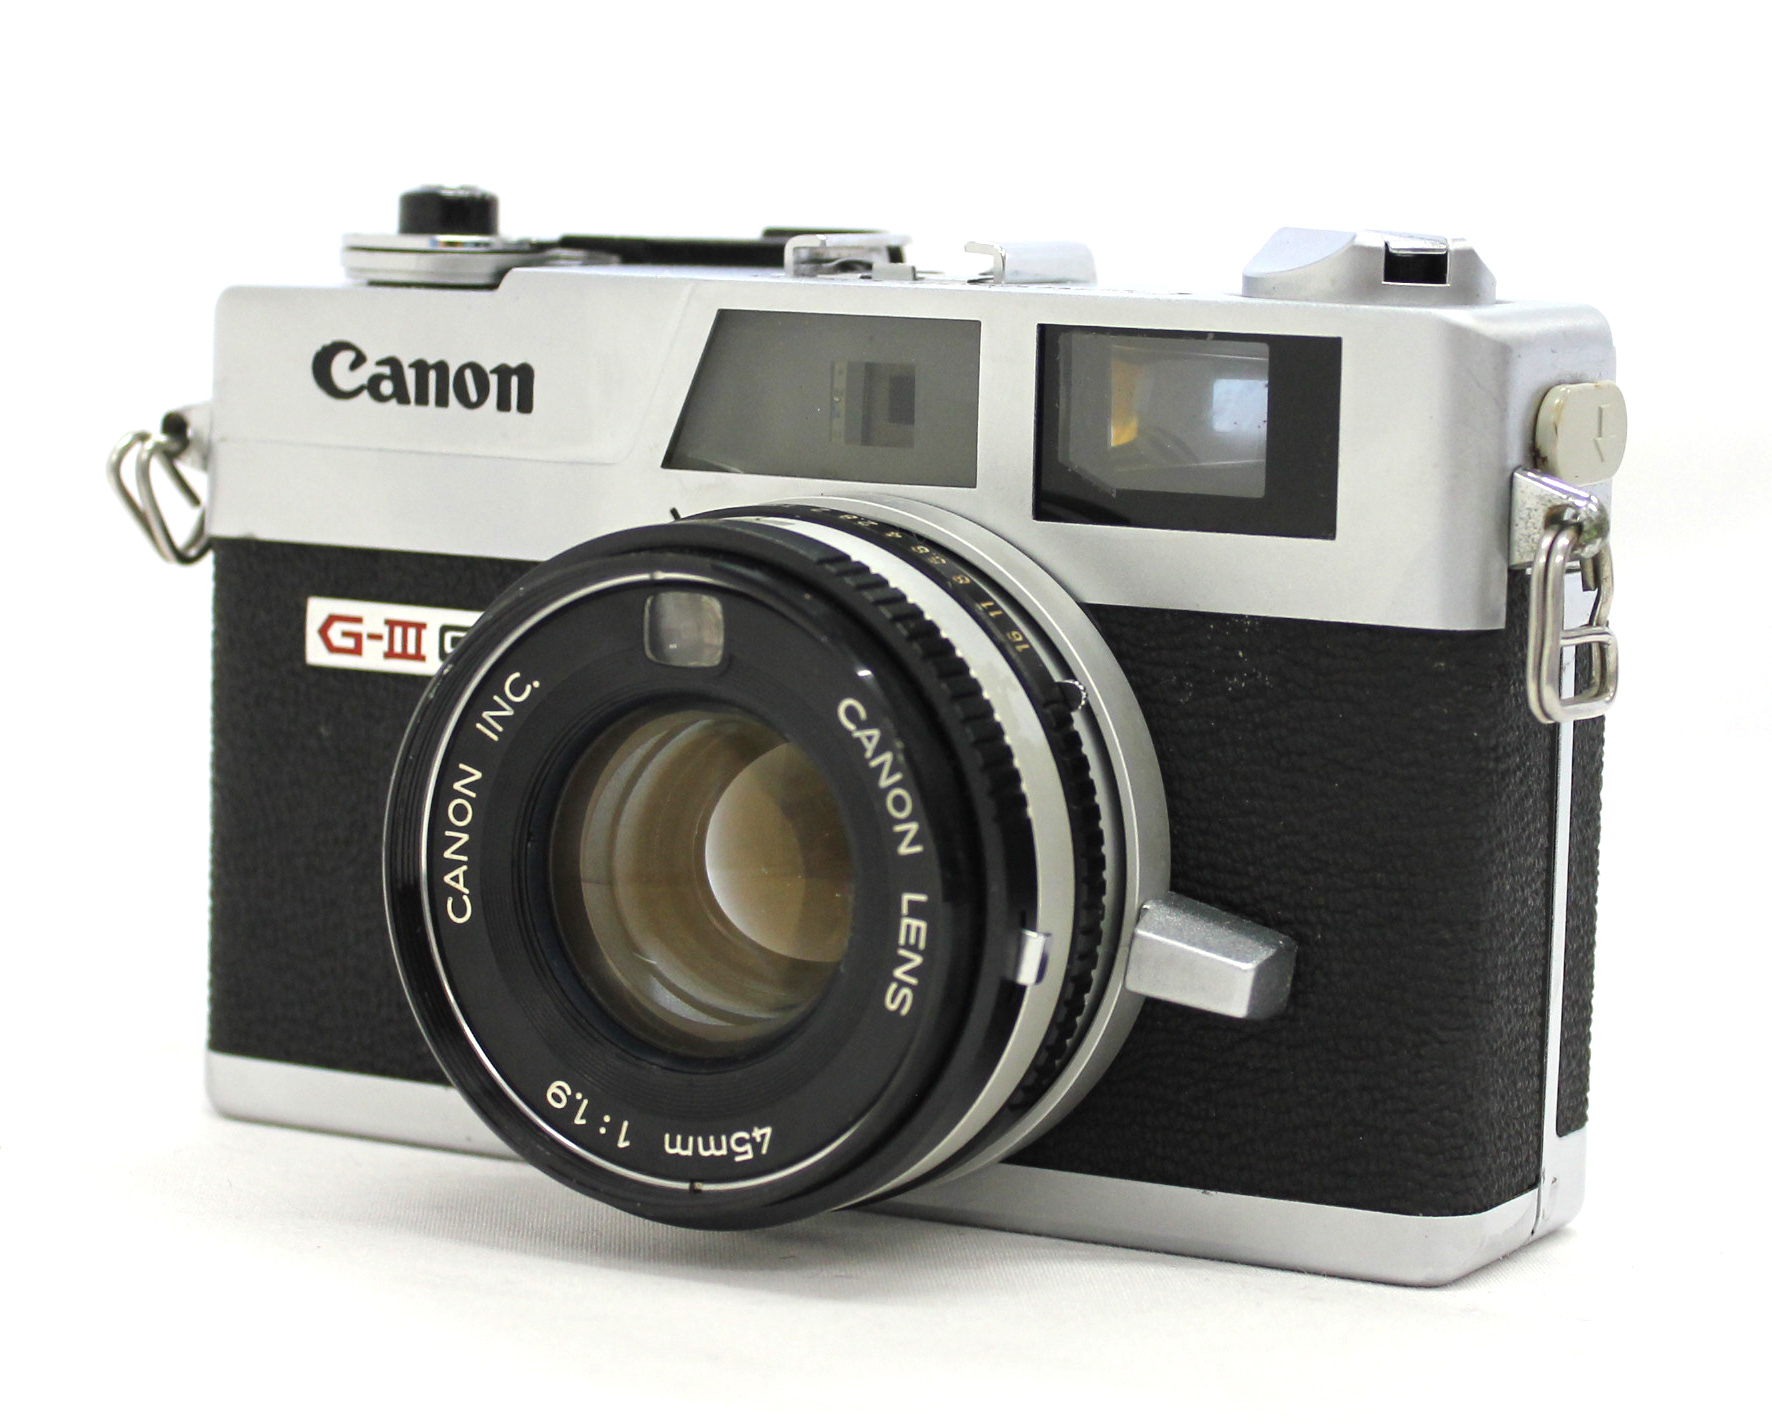 [Excellent+++] Canon Canonet QL19 GIII G3 Rangefinder 35mm Film Camera w/ 45mm F/1.9 Lens from Japan